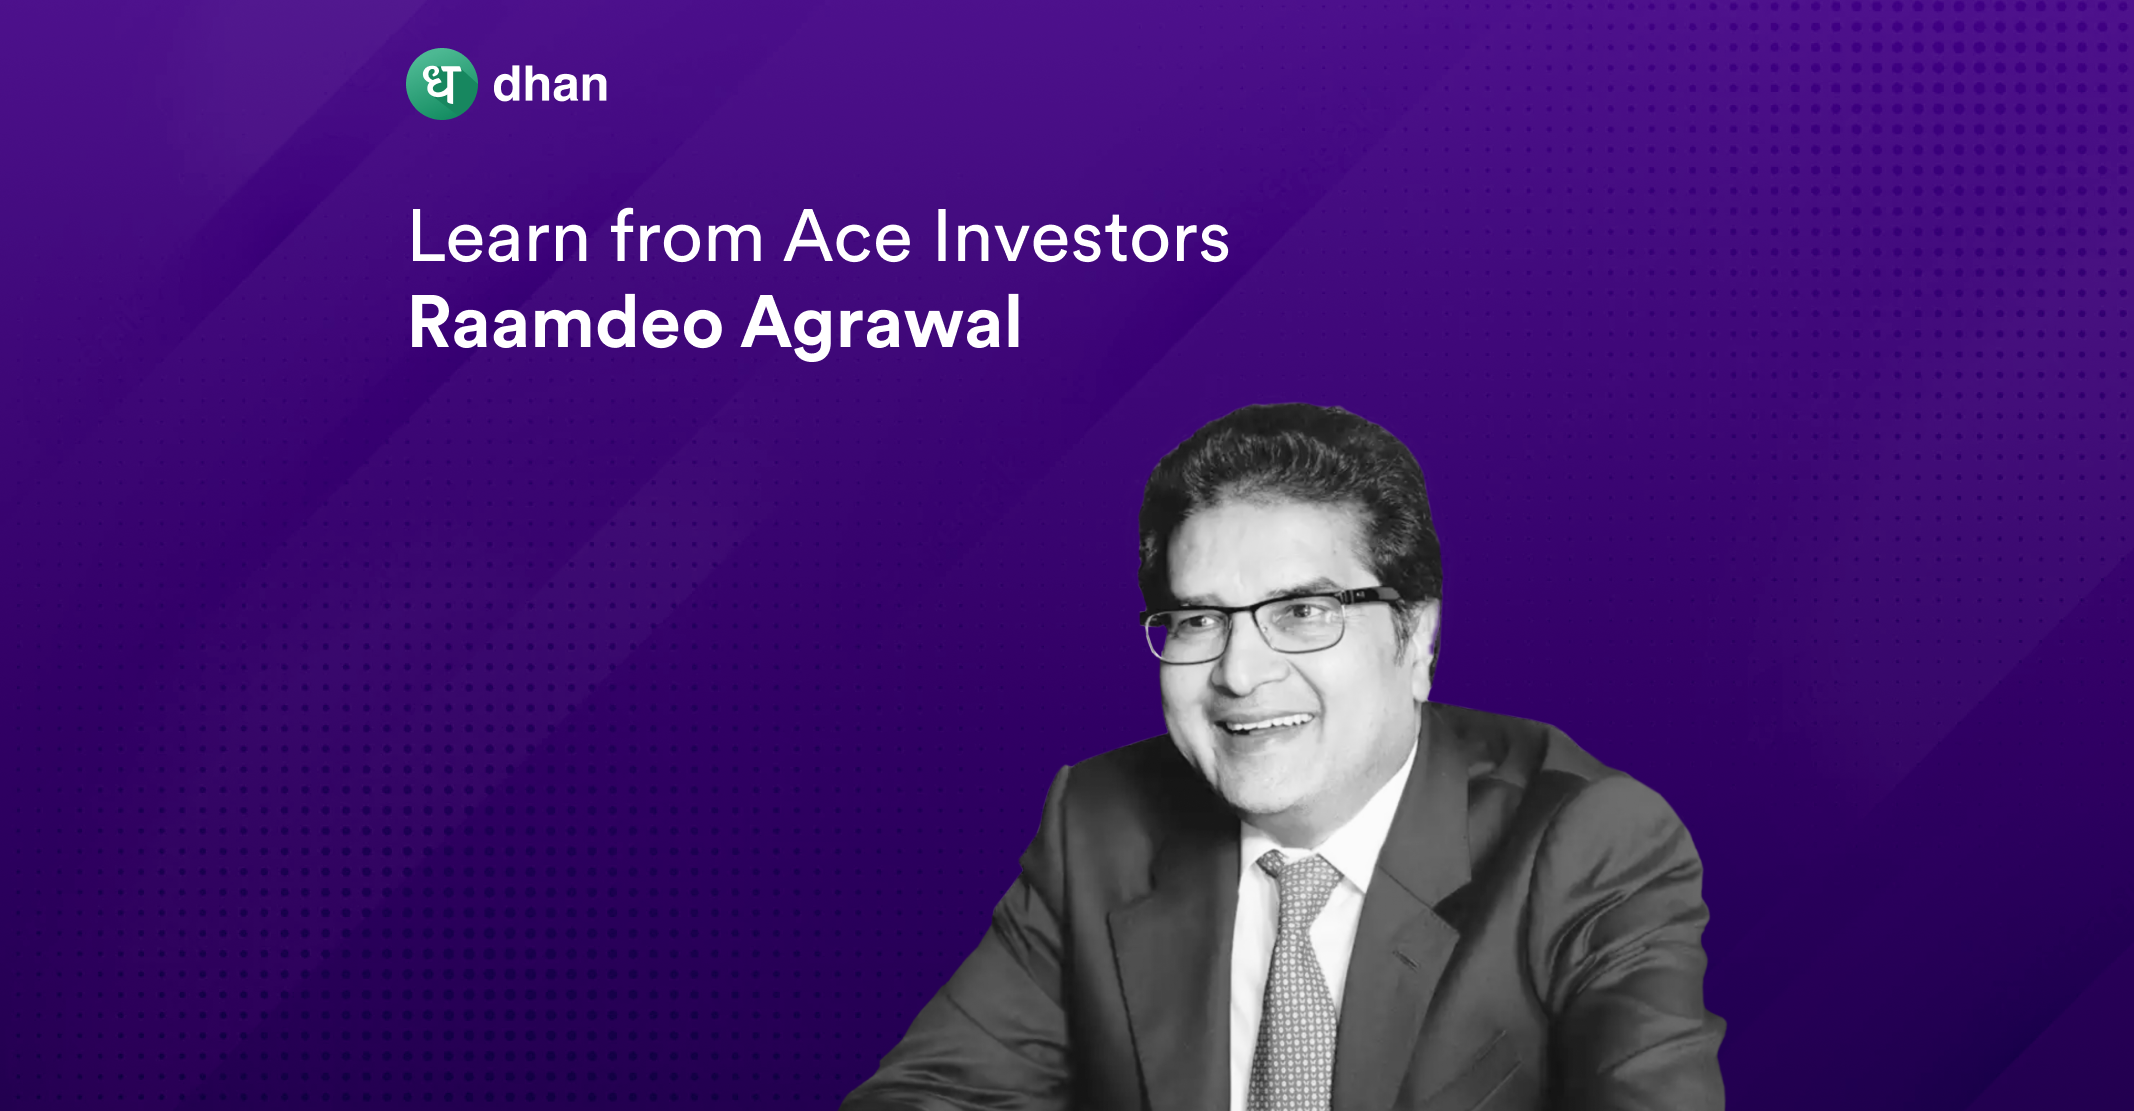 Ramdeo Agarwal Investment Strategy - The Ace Investor